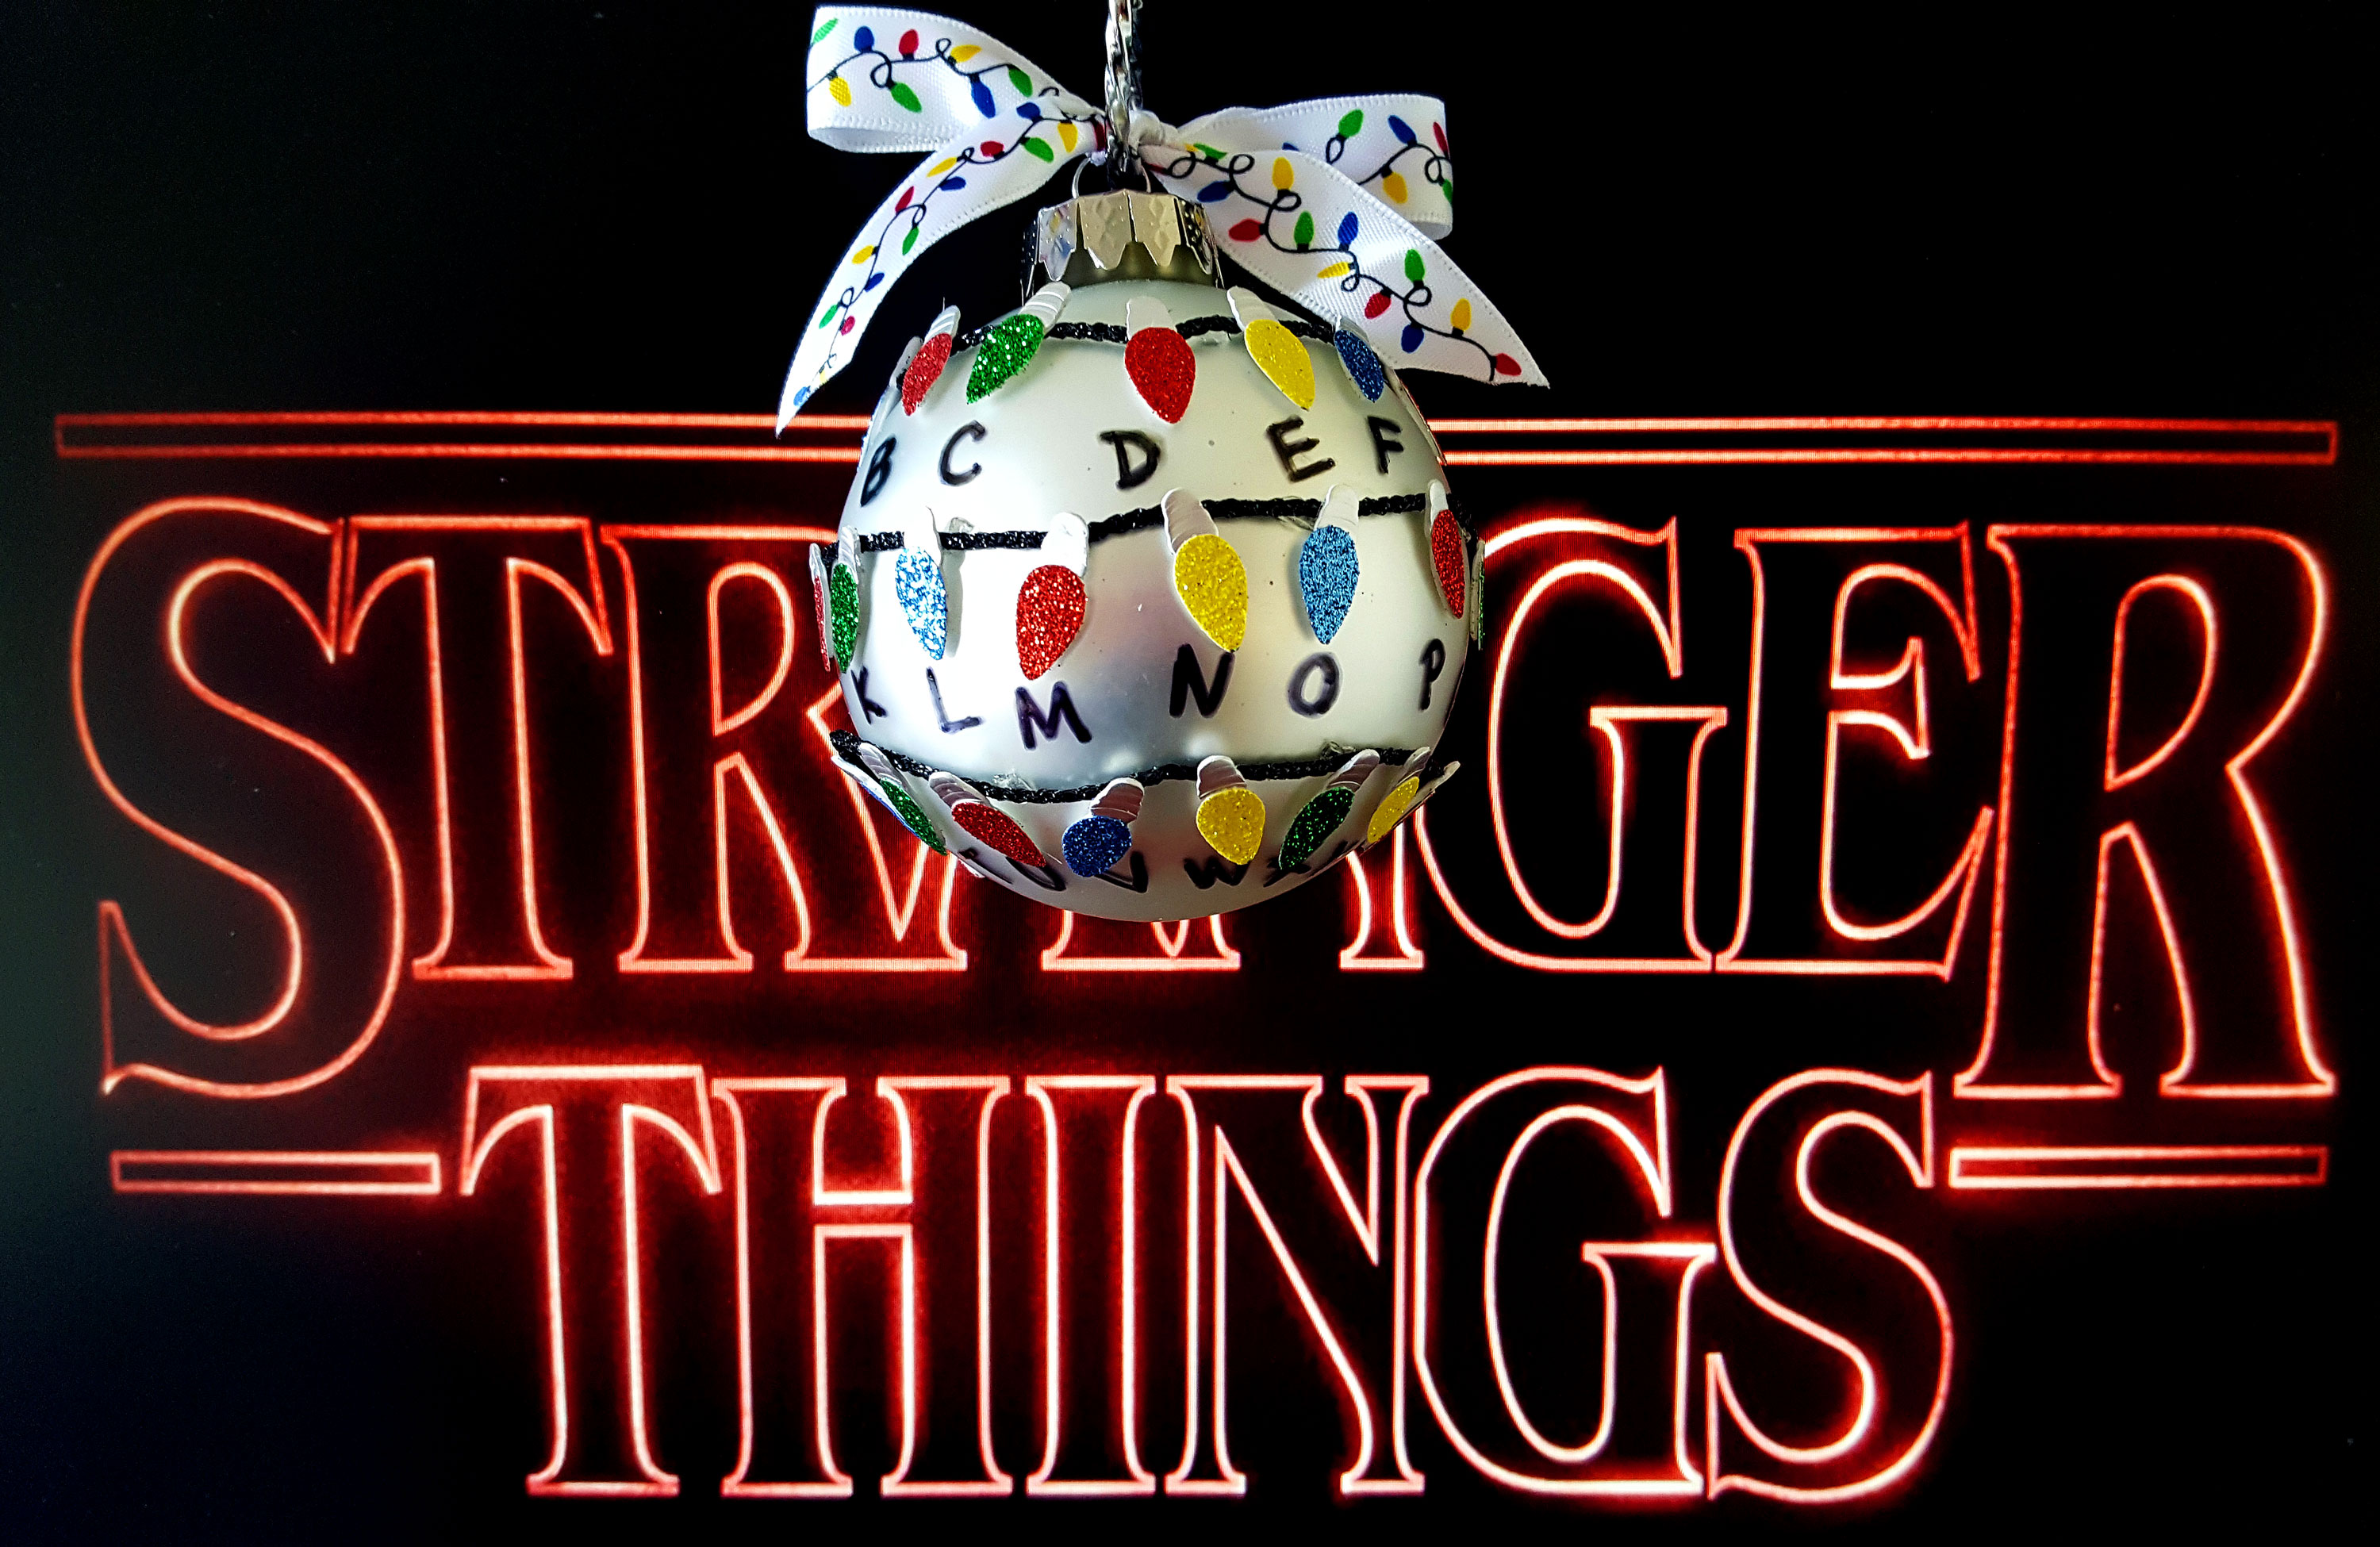 Stranger Things DIY Ornament made with black string, light stickers, marker and a glass ball. | OrnamentShop.com